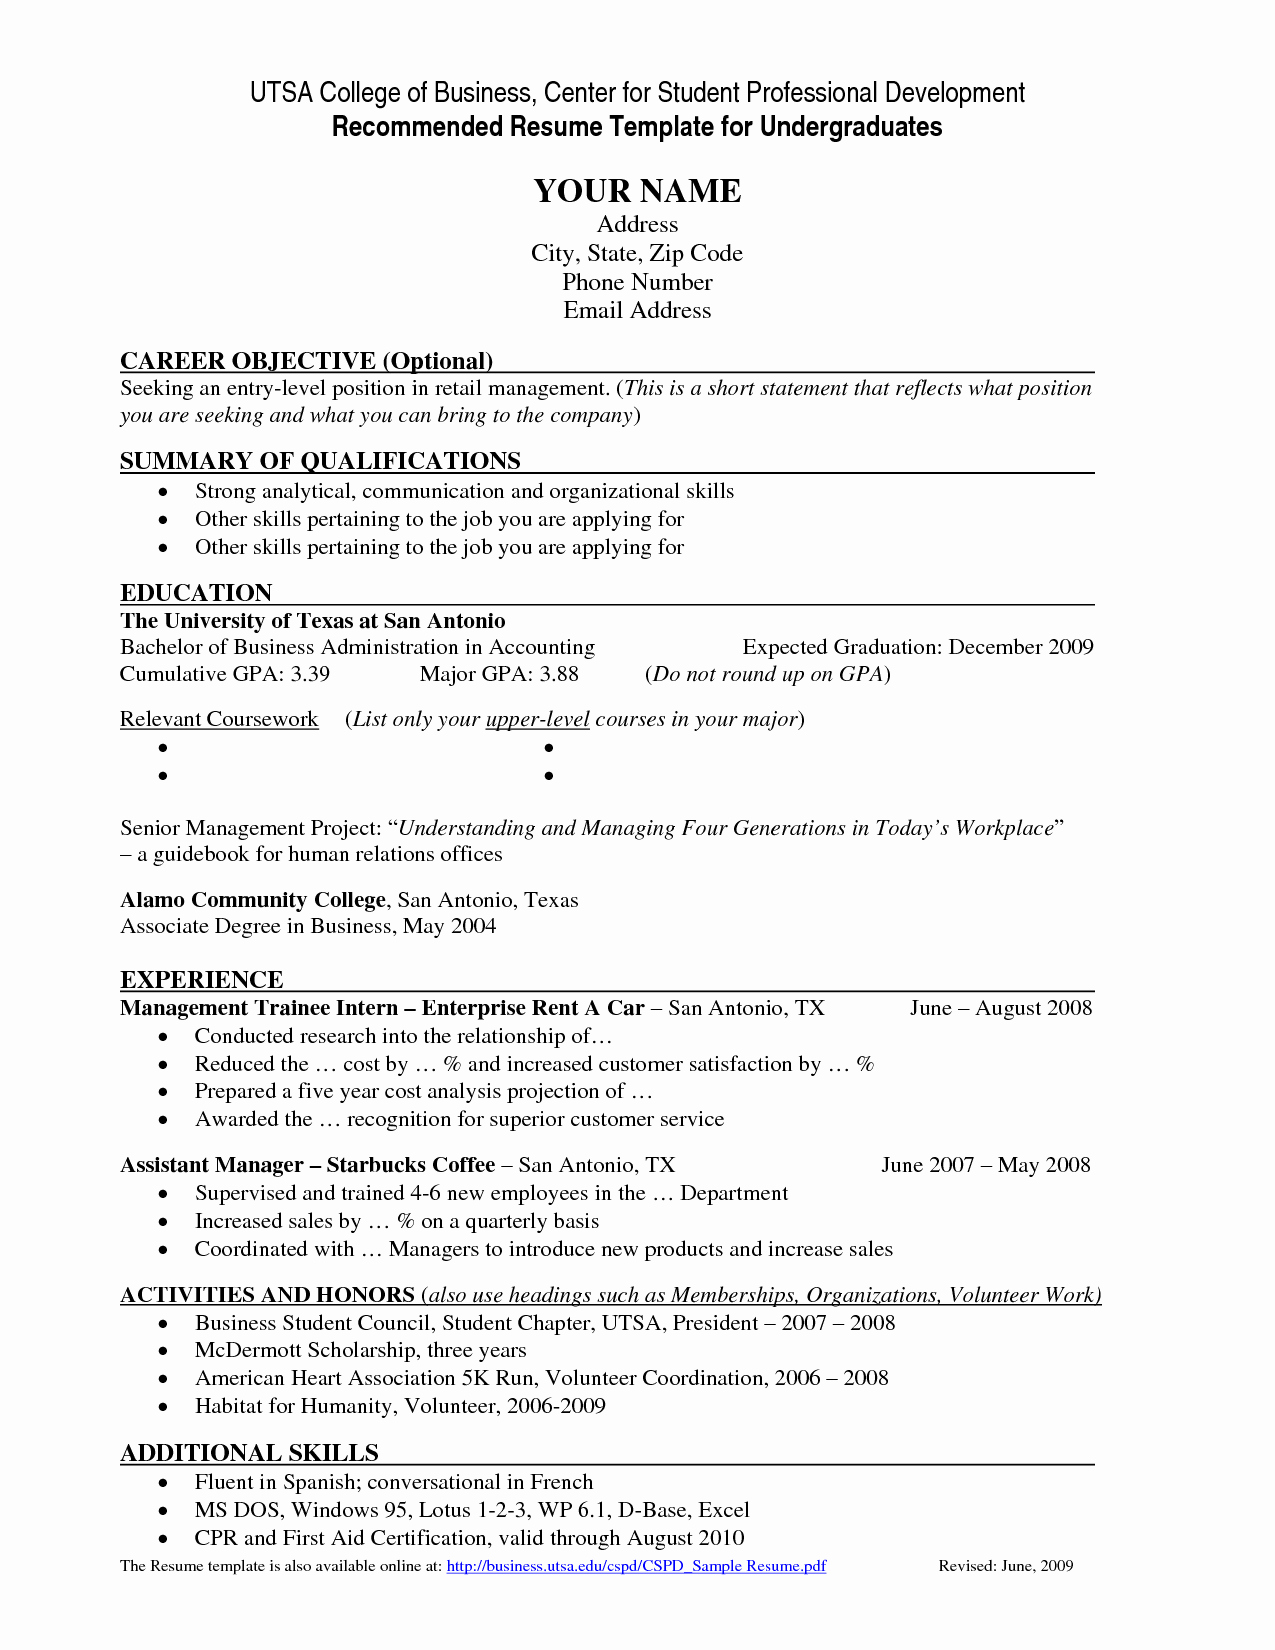 Sample Resume College Student Elegant Resume Template for College Students